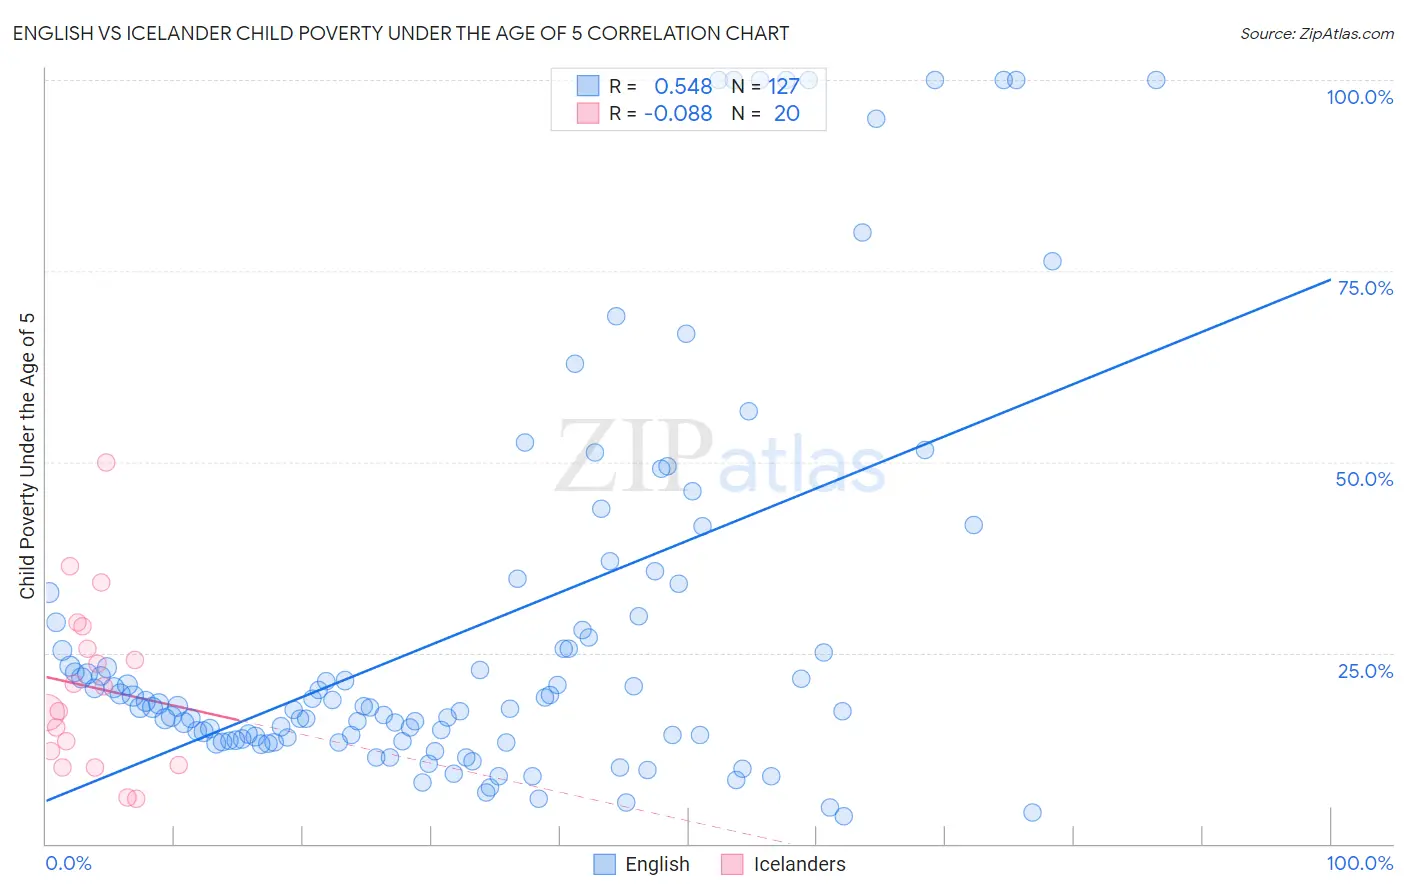 English vs Icelander Child Poverty Under the Age of 5